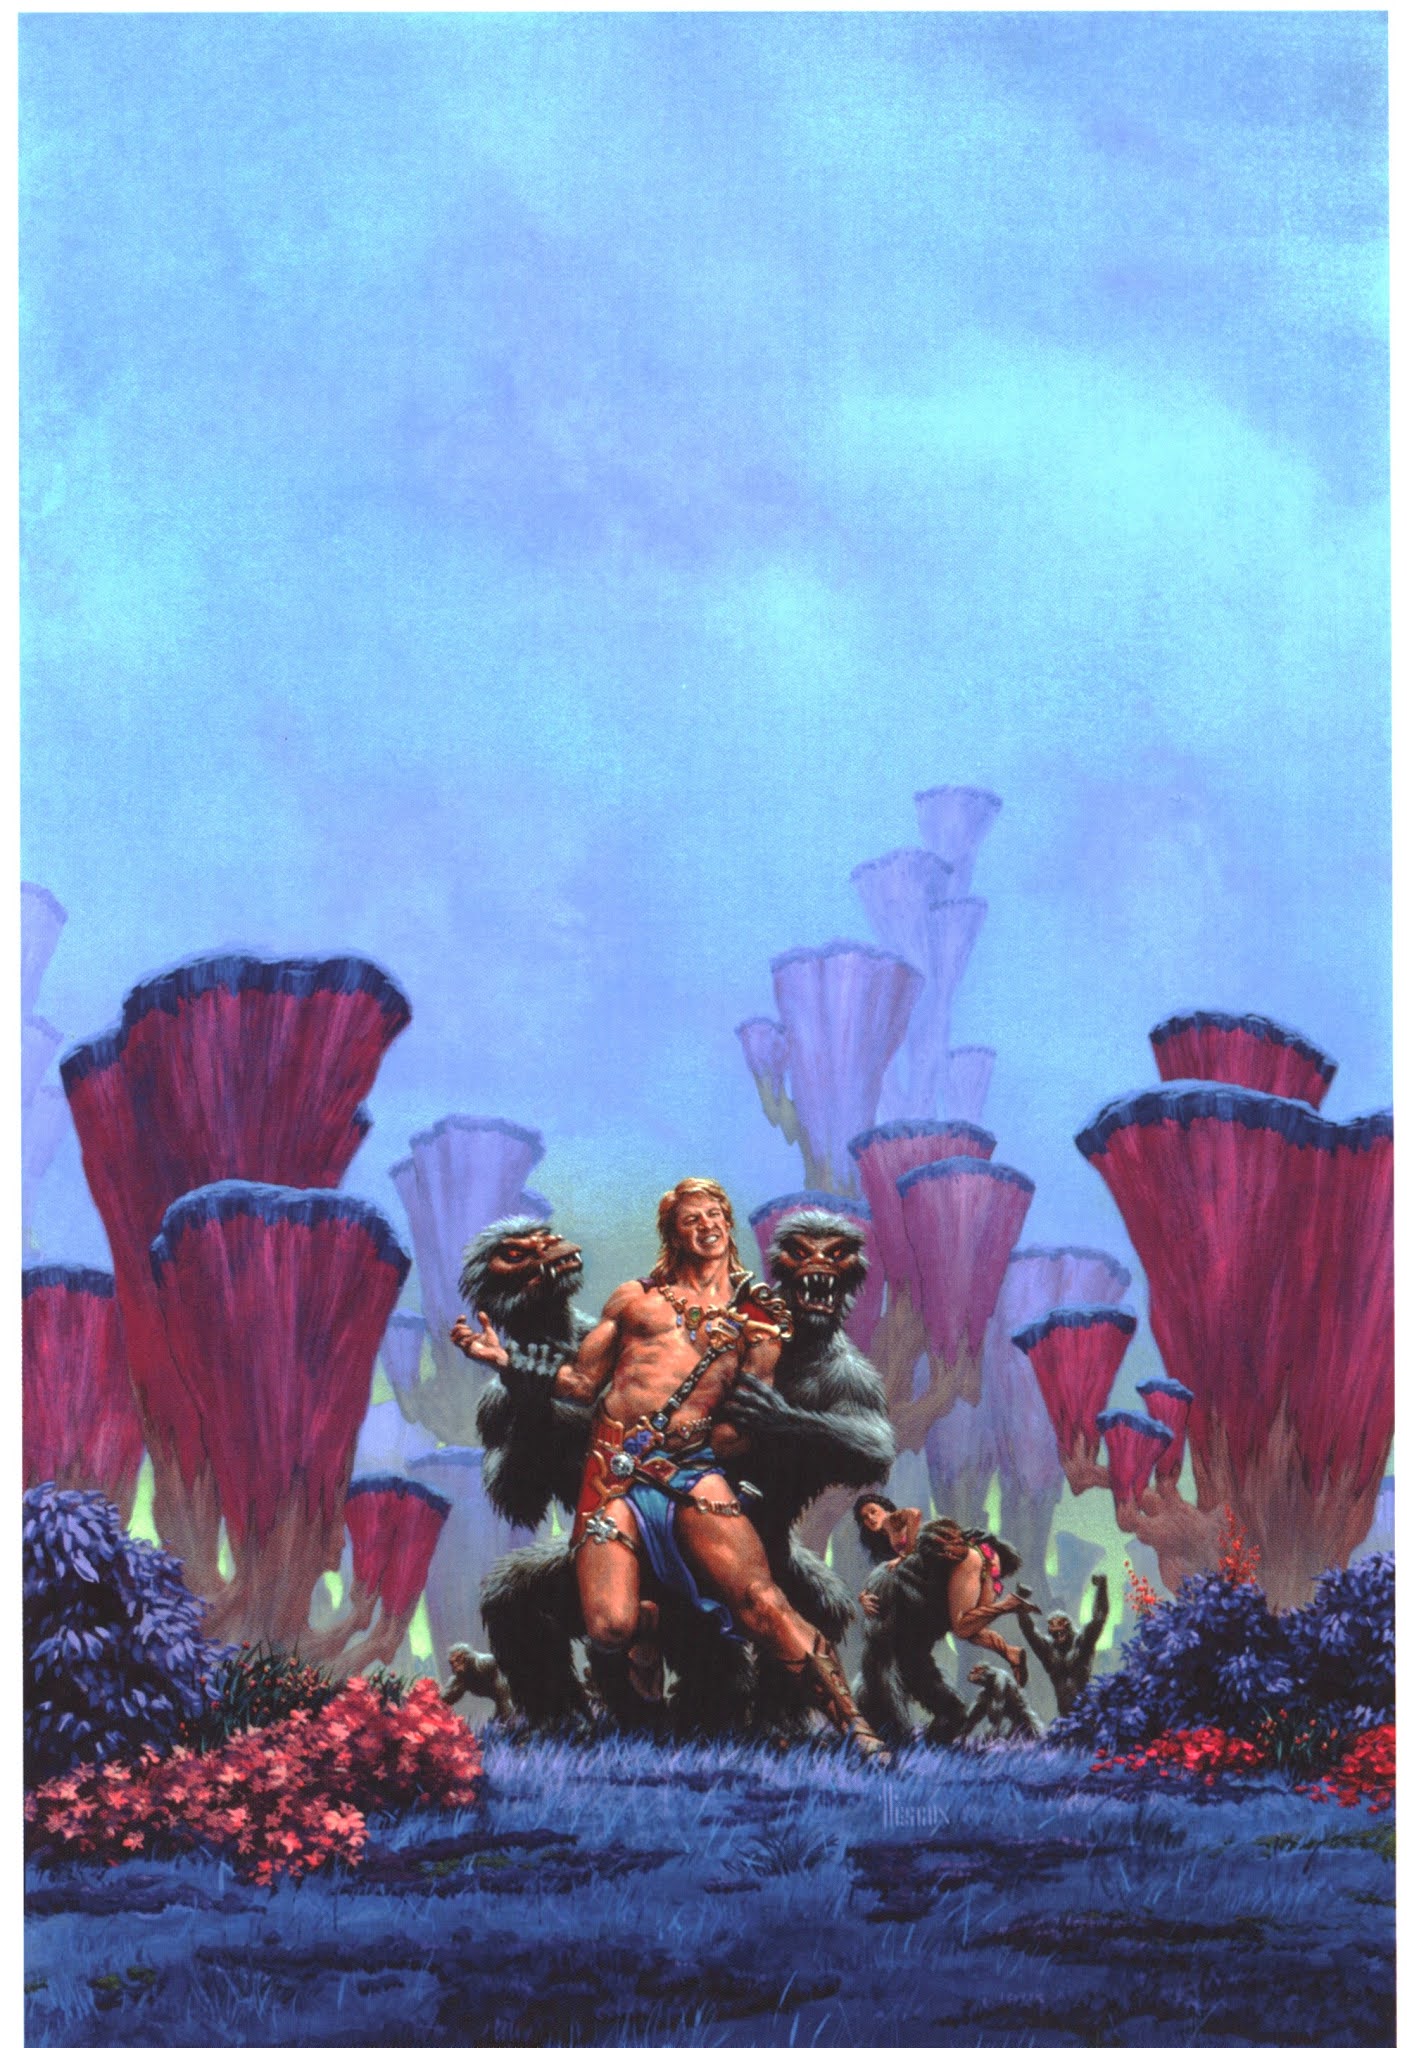 Details about   1994 Richard Hescox Fantasy Art Trading Card Pack 